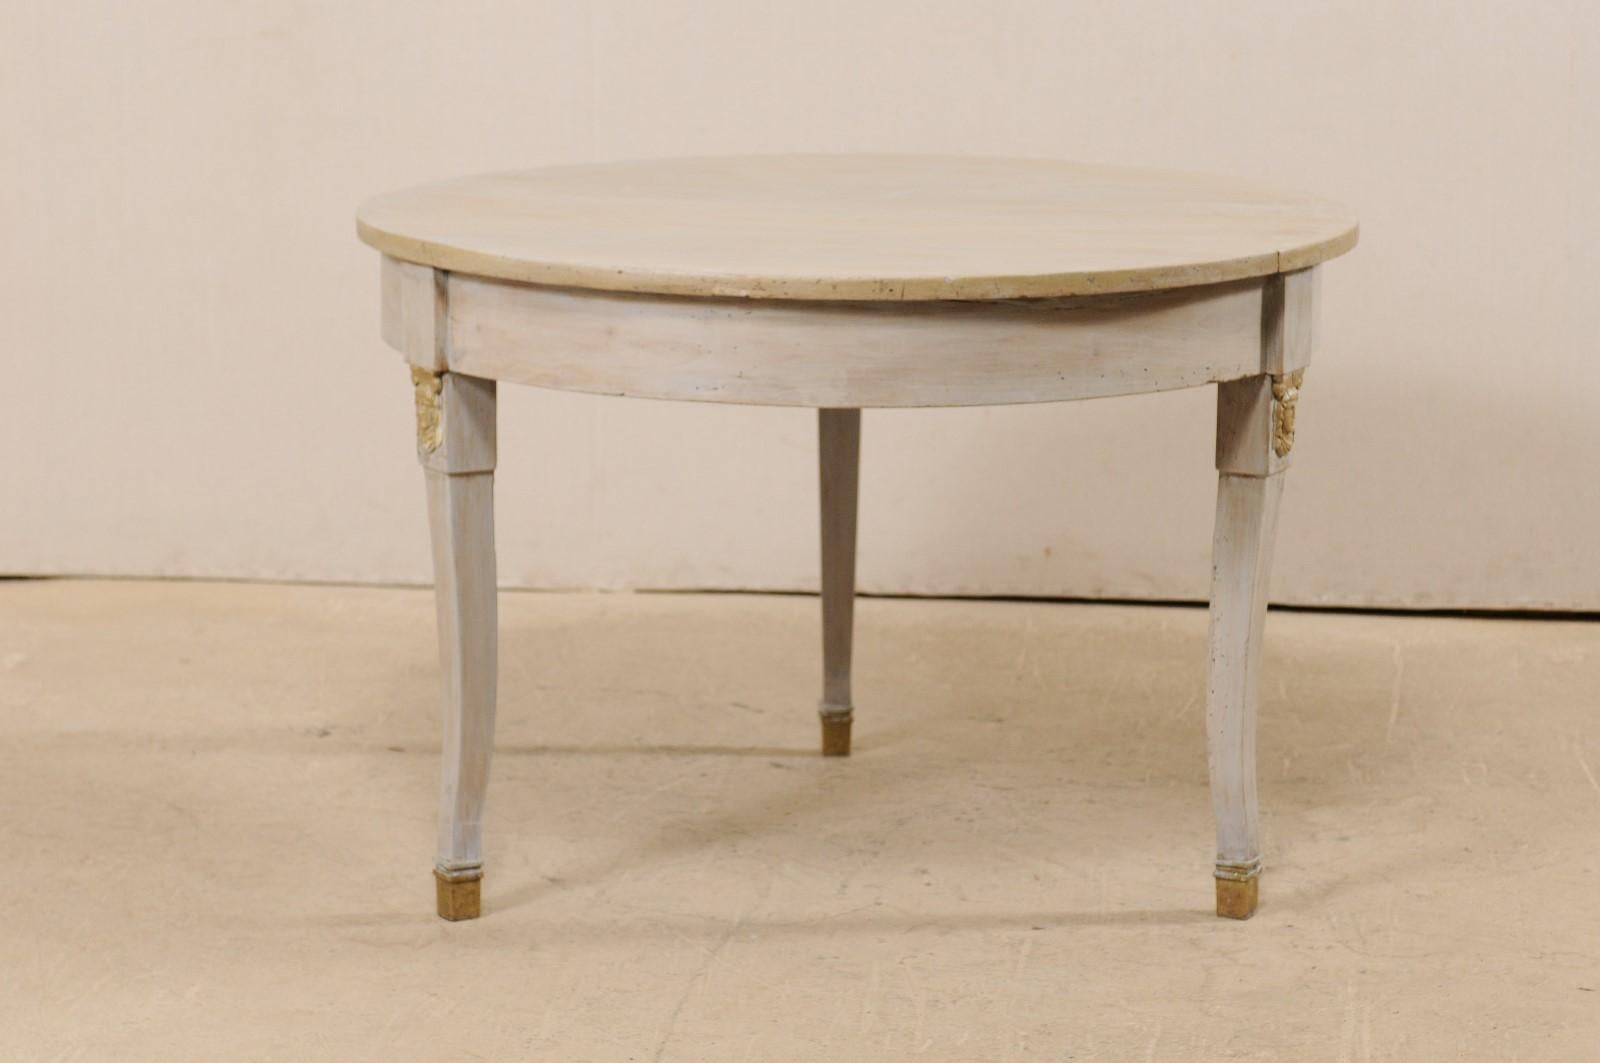 A French painted wood center table from the 1920s. This antique table from France features a circular-shaped top with nicely carved and rounded apron, which is raised on gently curved legs with facial carvings at the knees, and terminate into